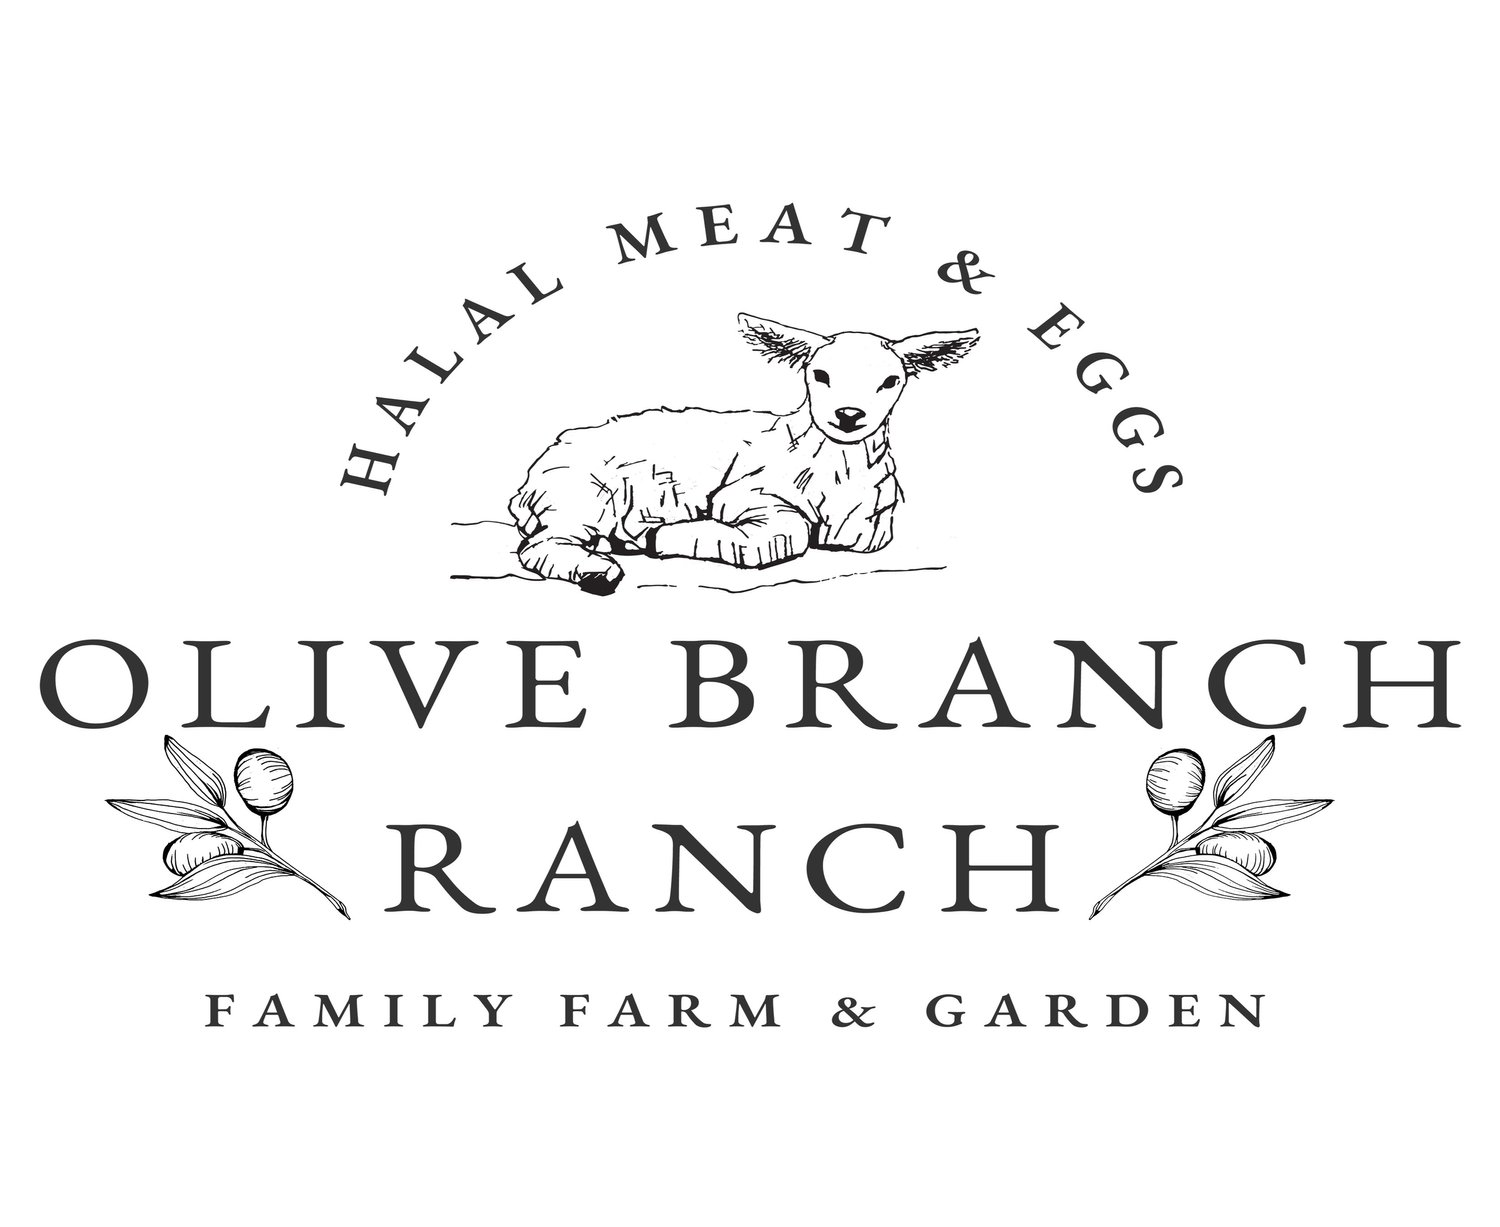 The Olive Branch Ranch